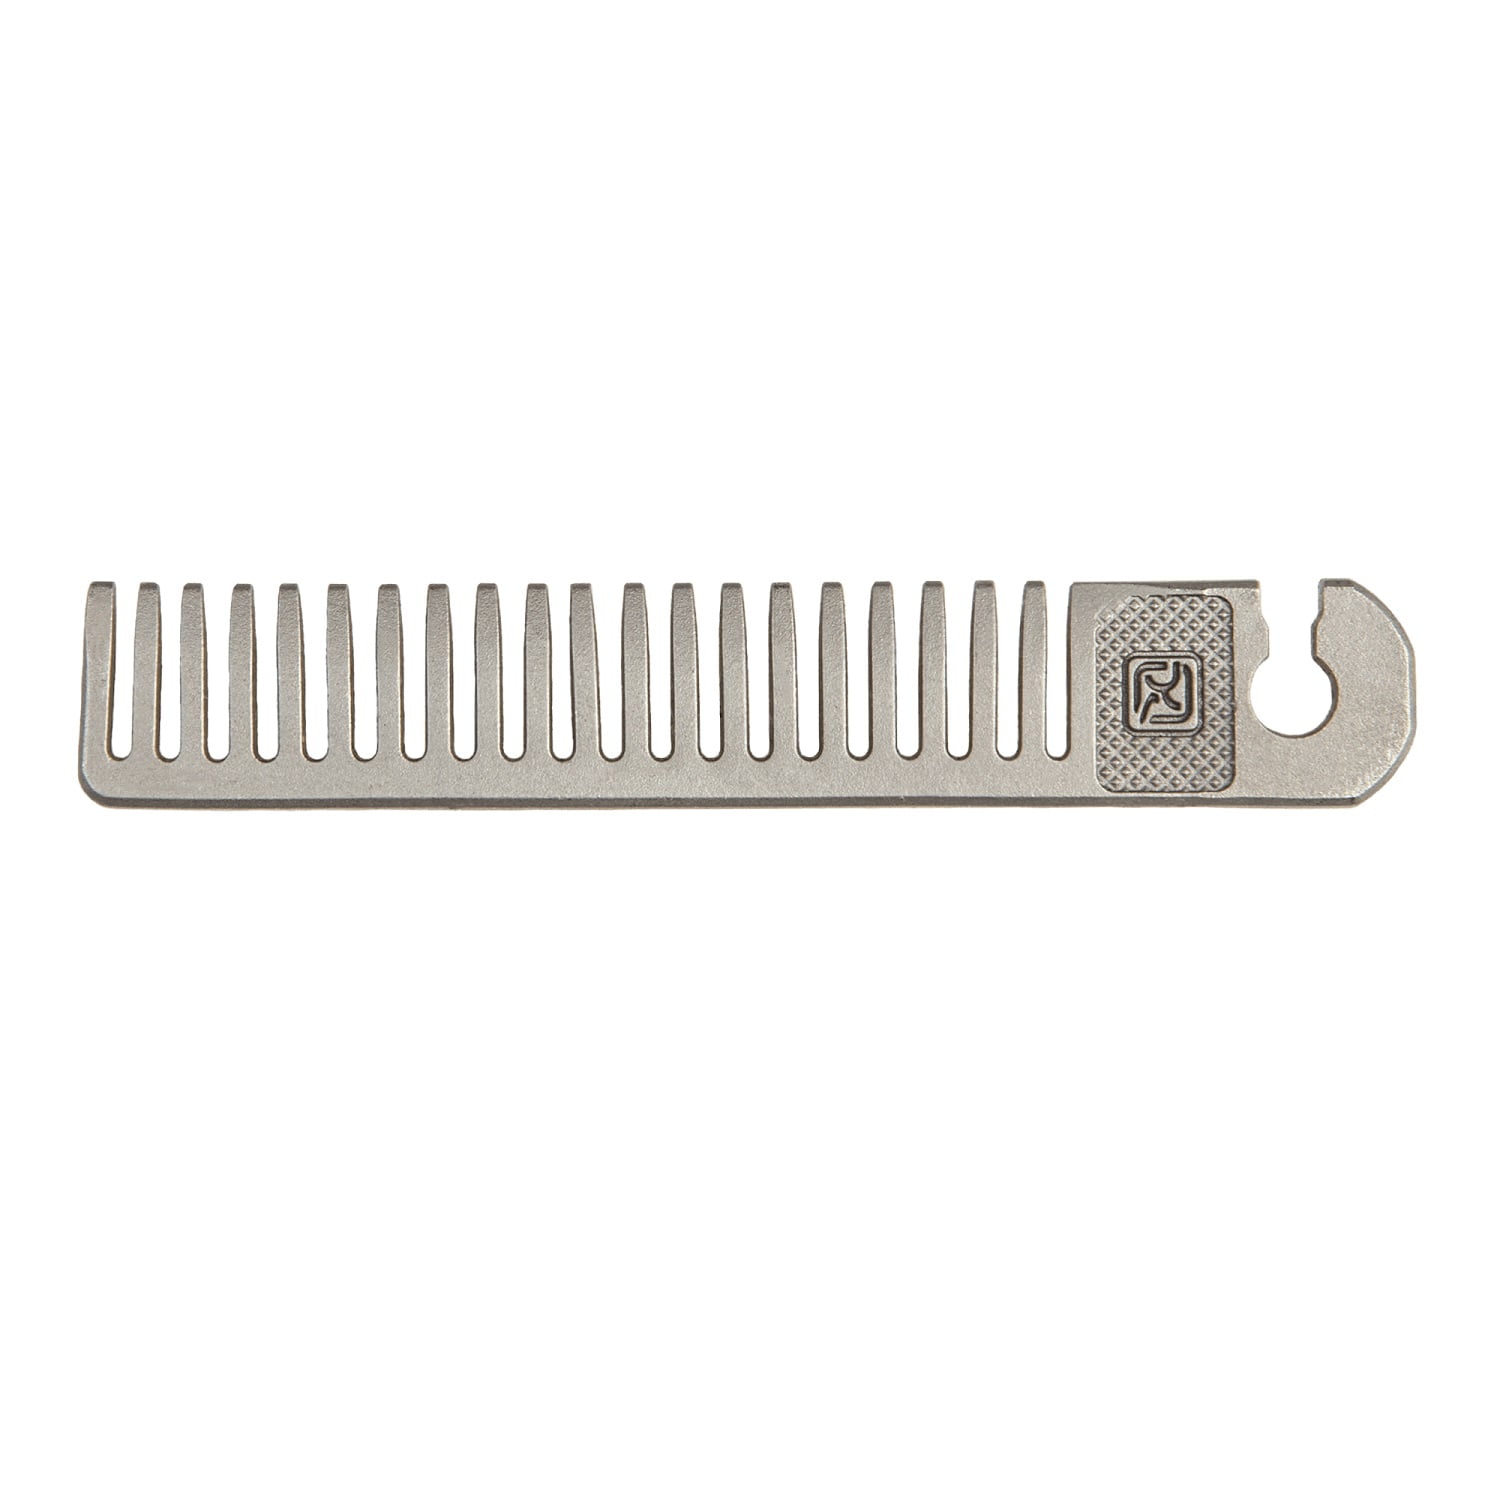 5973540 Stowaway Tools Stainless Steel Comb, 2.62 In.